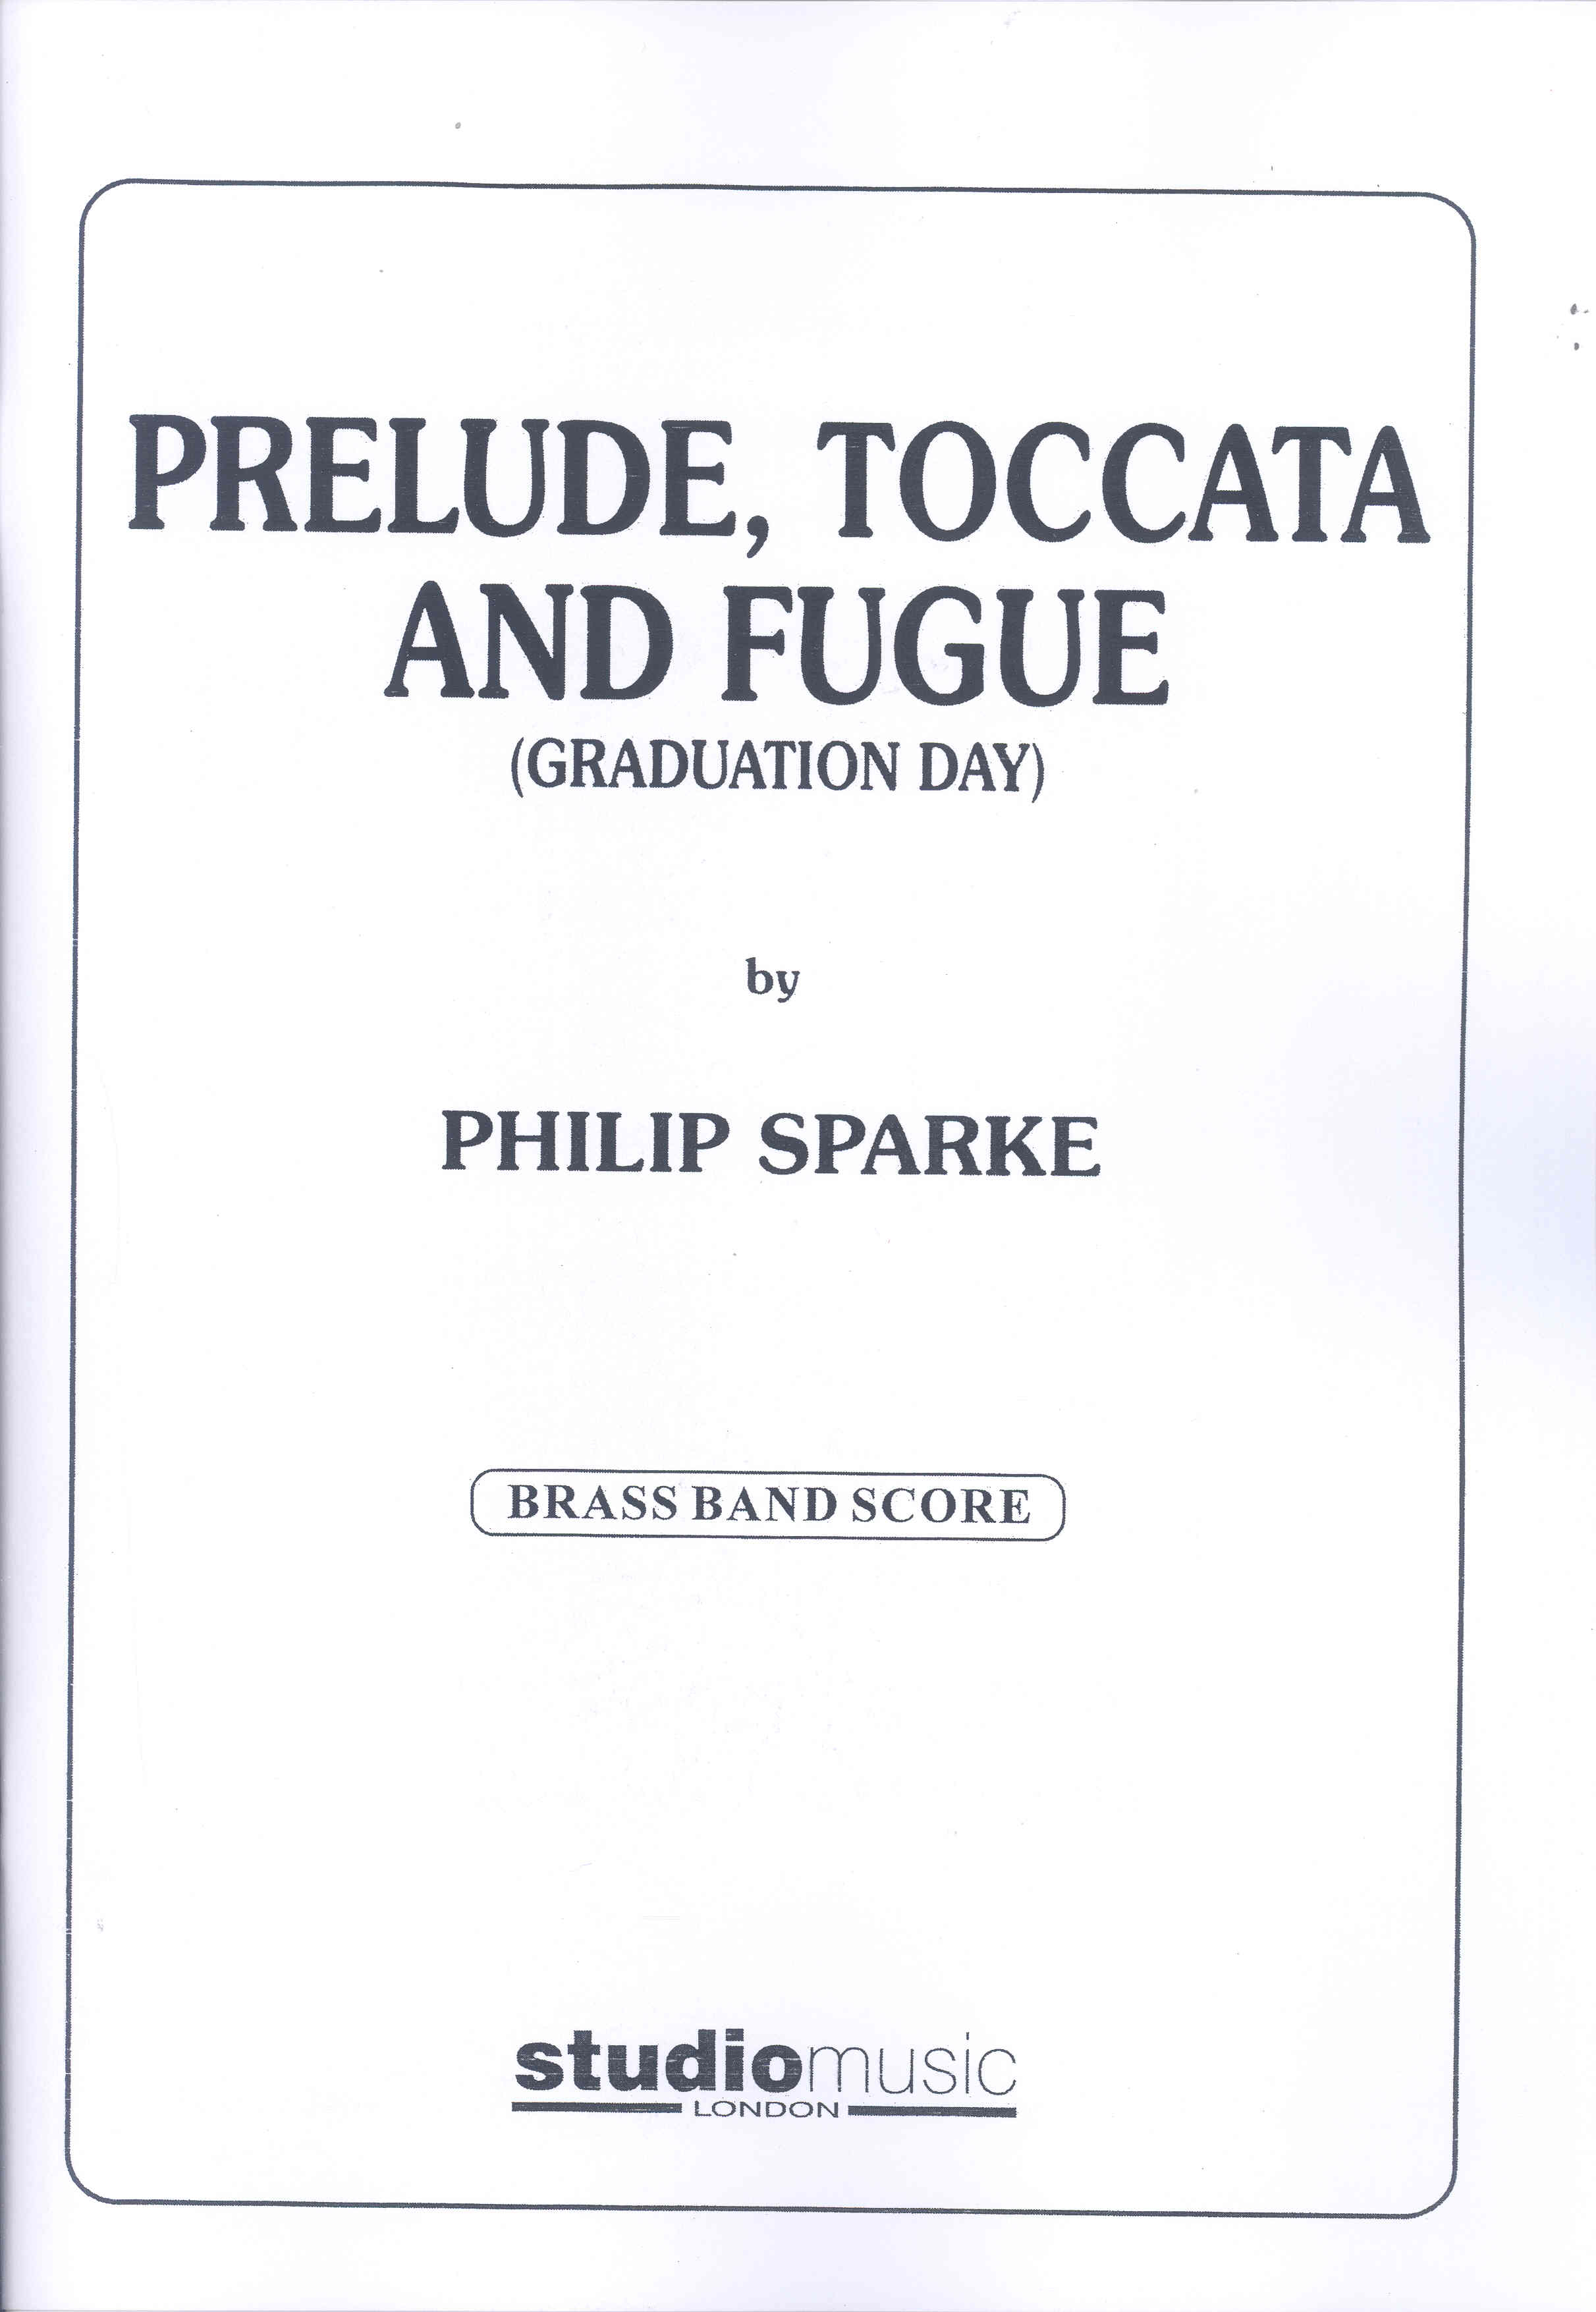 Prelude Toccata & Fugue Sparke Brass Band Score Sheet Music Songbook